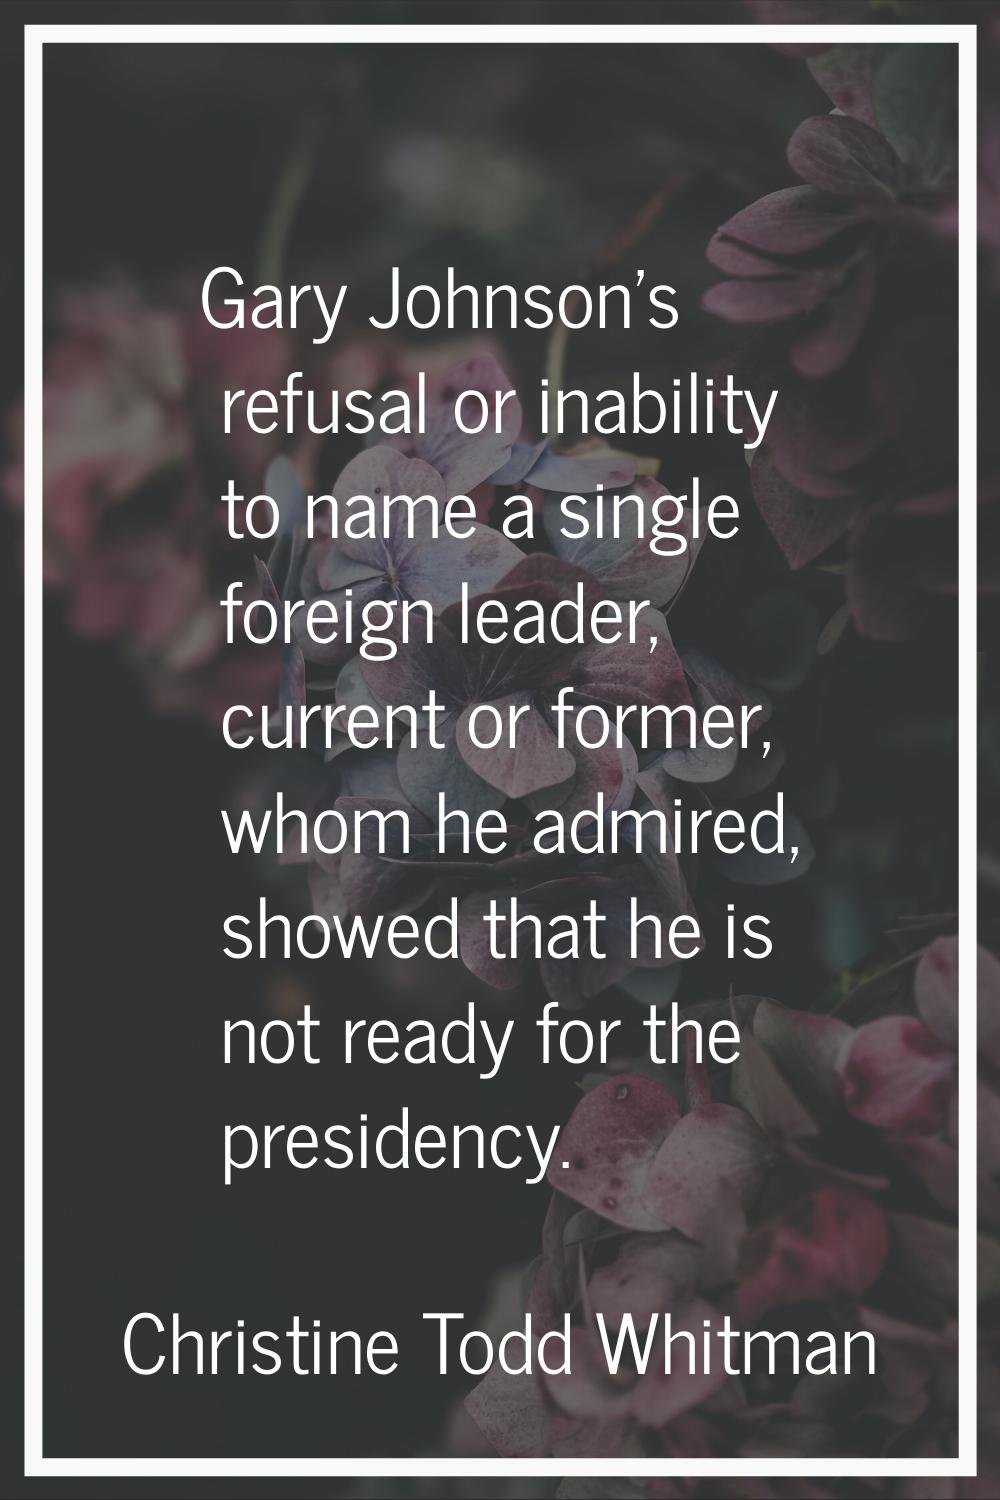 Gary Johnson's refusal or inability to name a single foreign leader, current or former, whom he adm